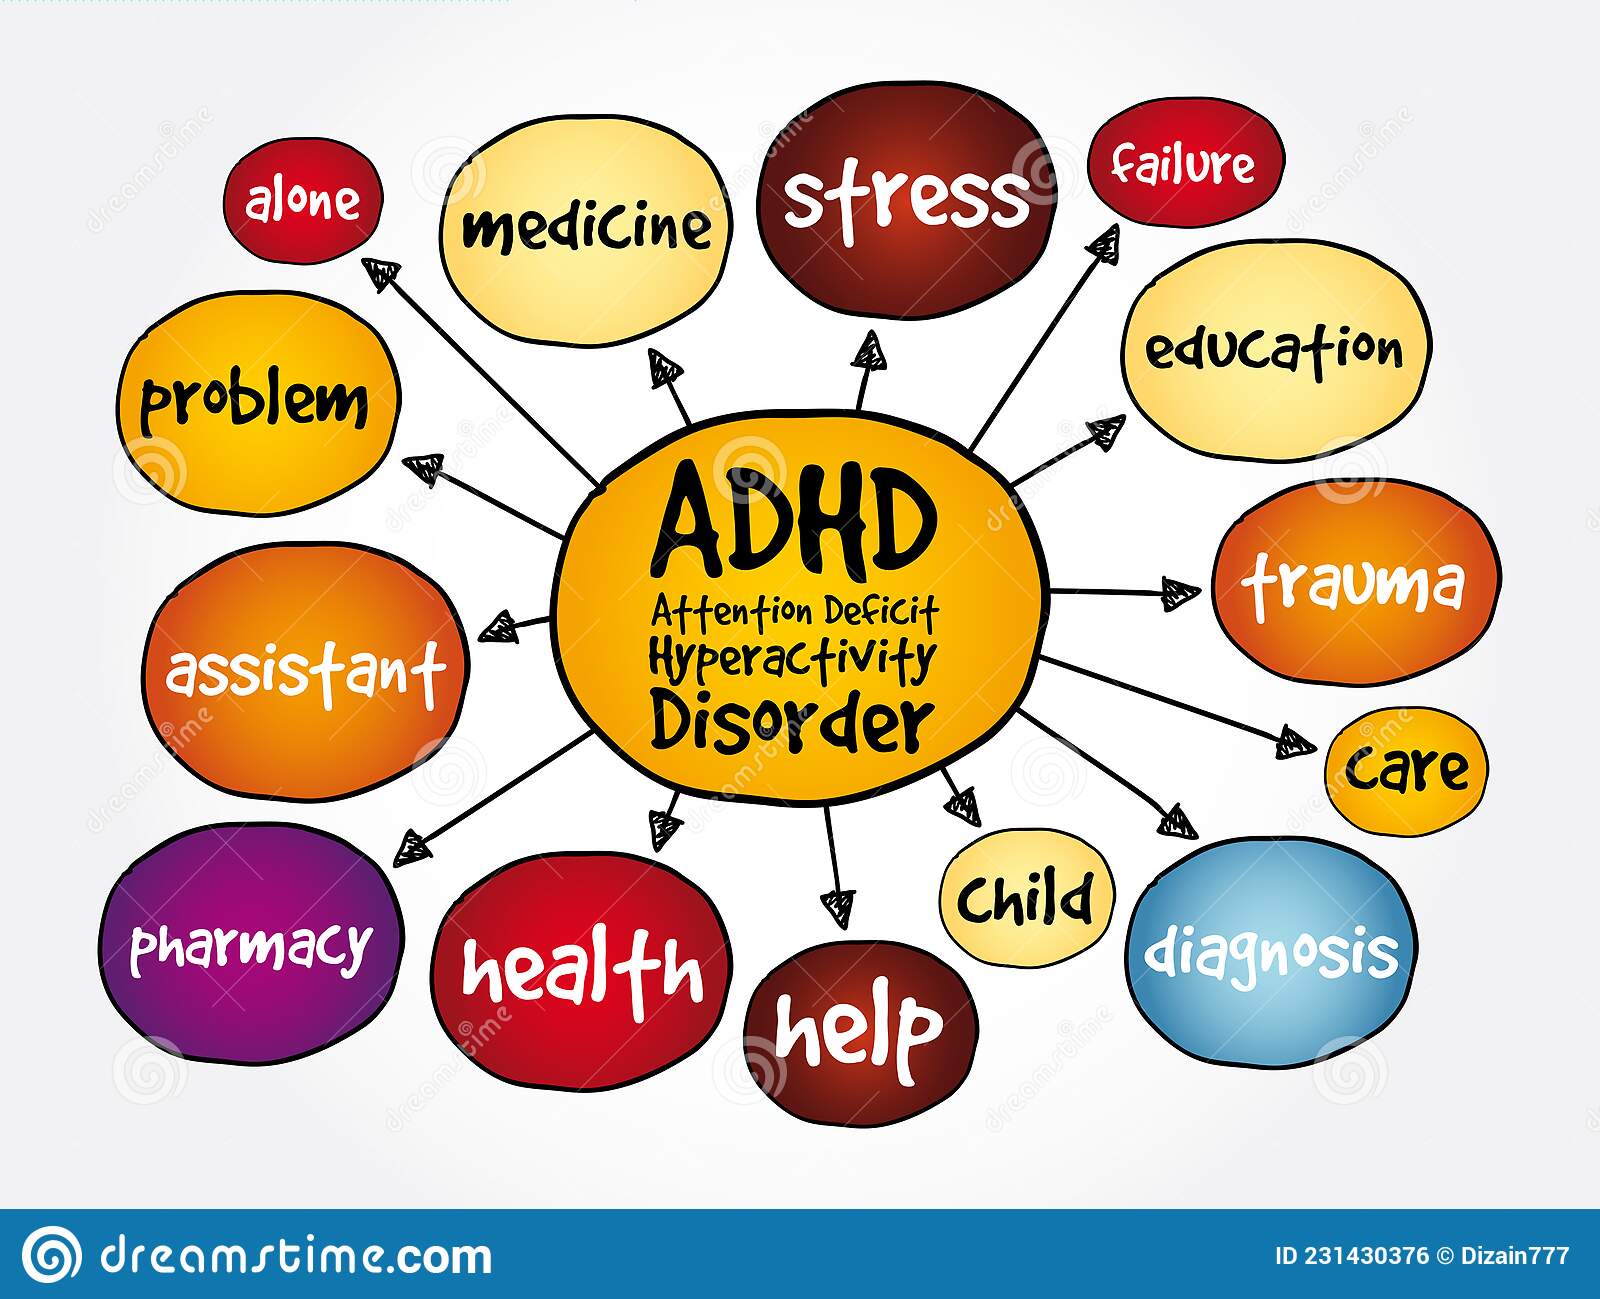 Adhd Attention Deficit Hyperactivity Disorder Mind Map Health Concept Presentations Reports Adhd Attention Deficit 231430376 